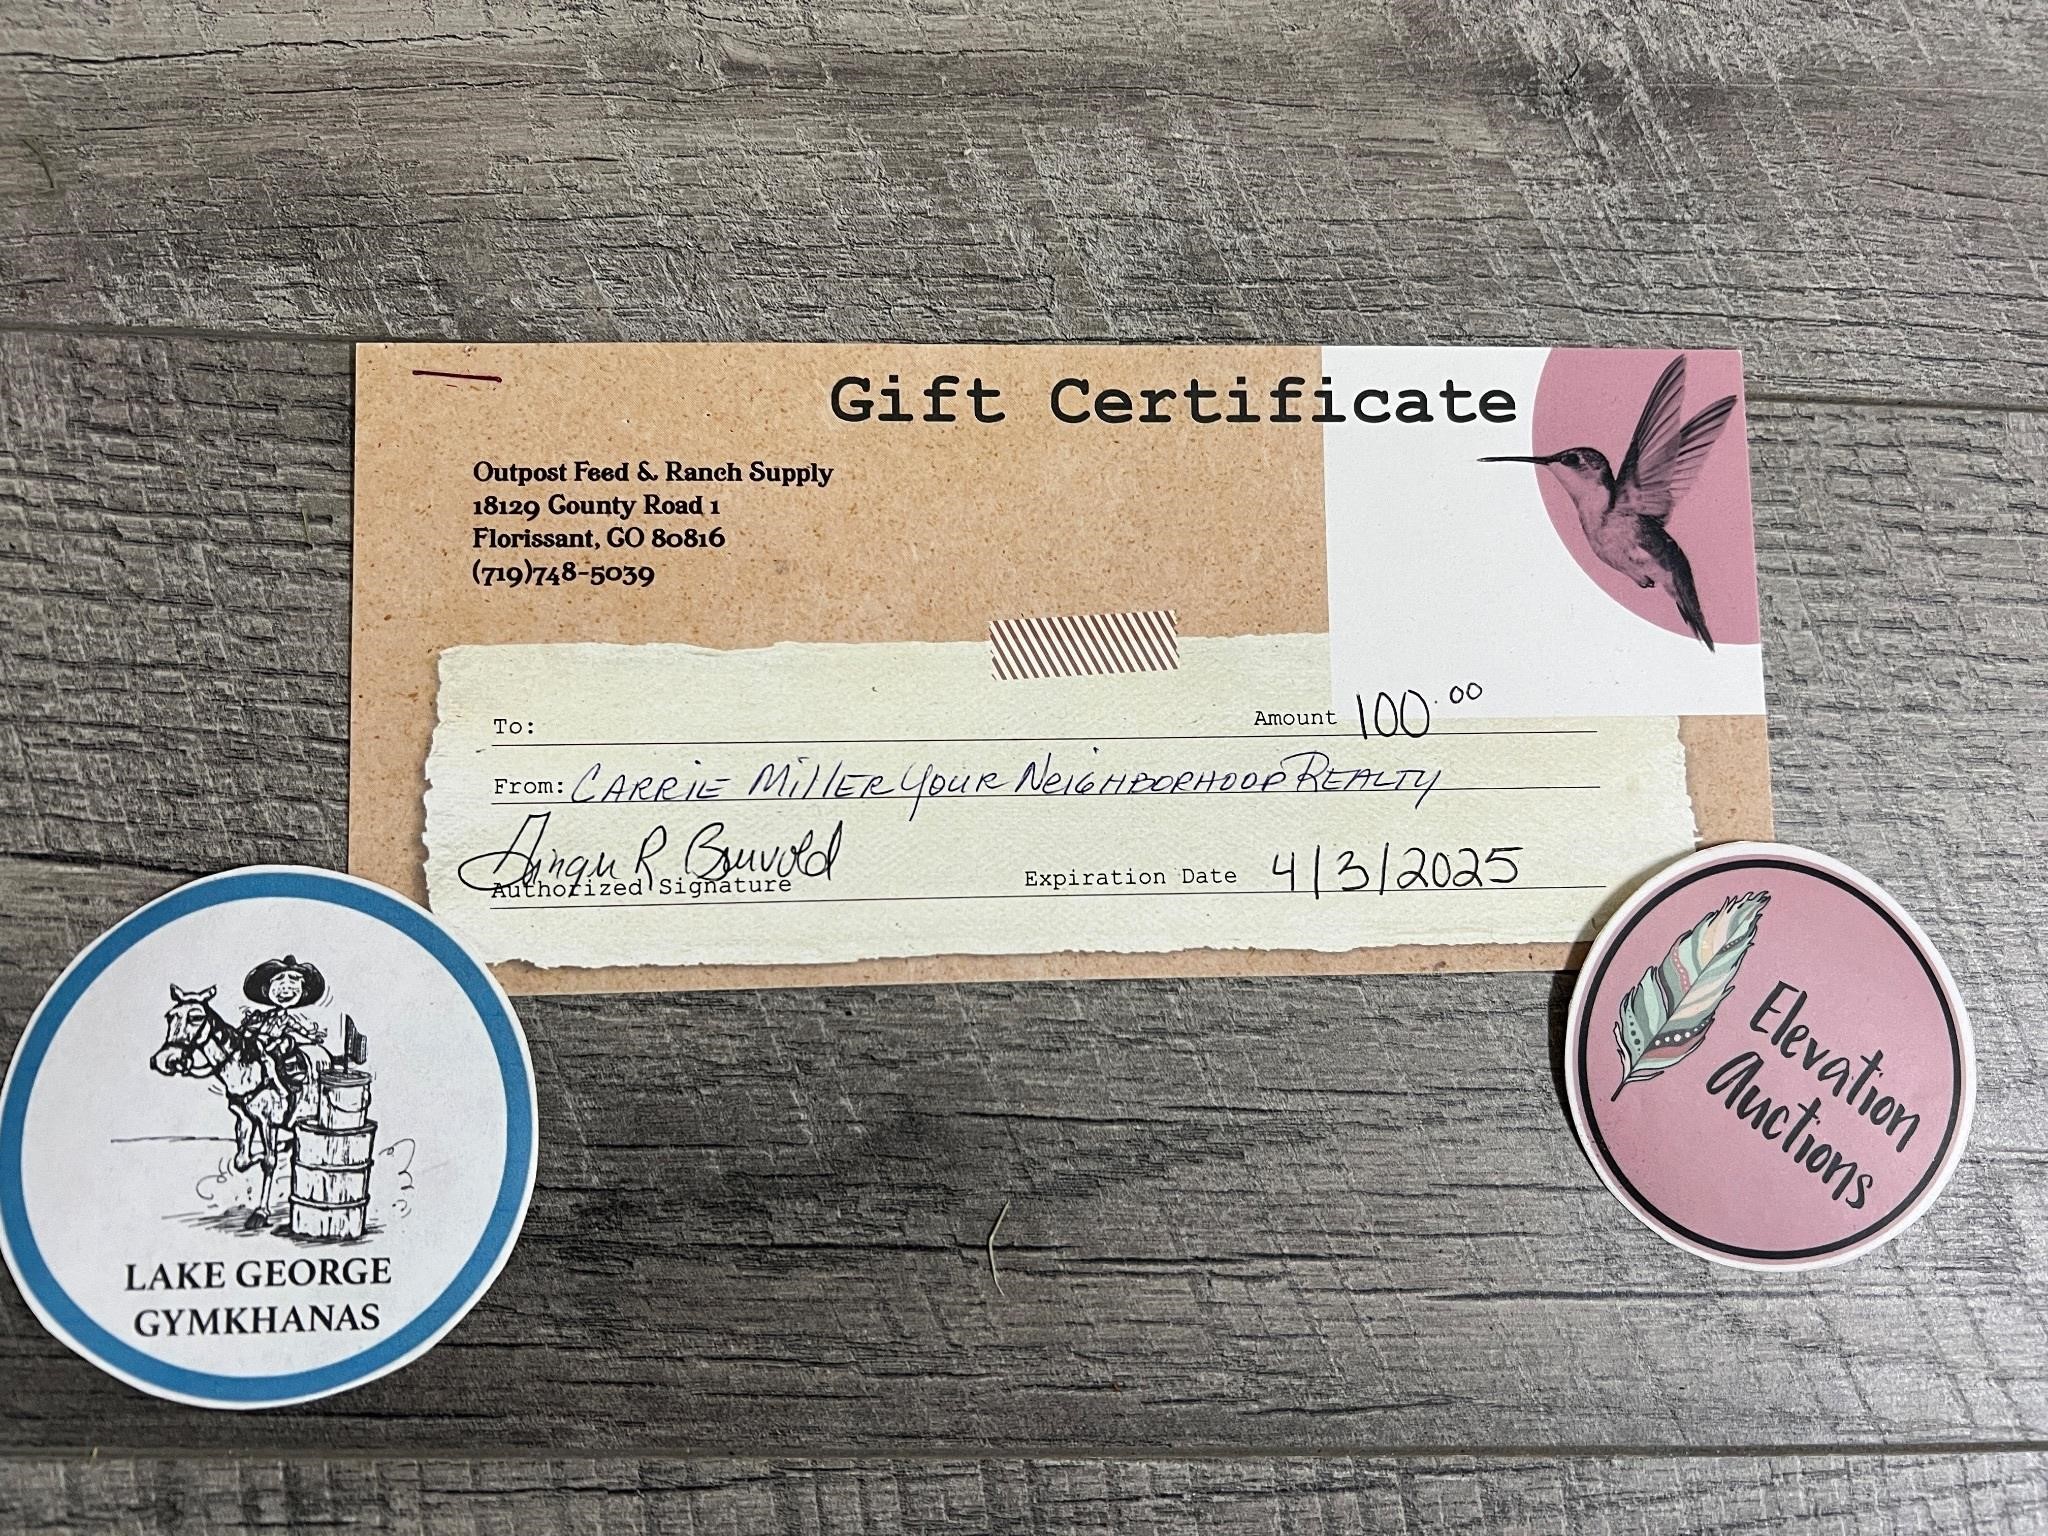 $100 Gift Certificate to Outpost Feed and Ranch